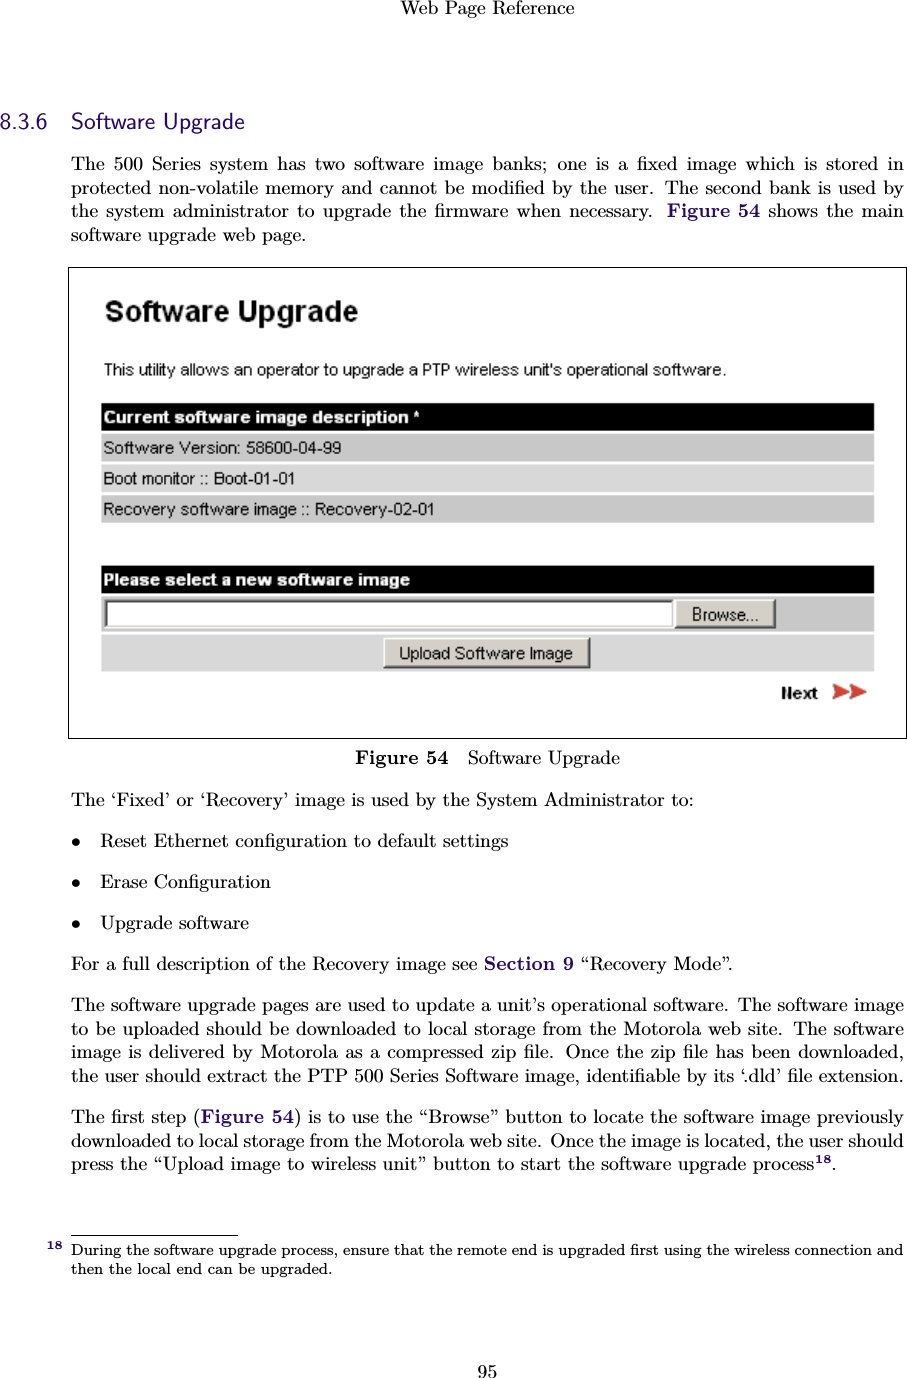 Web Page Reference958.3.6 Software UpgradeThe 500 Series system has two software image banks; one is a ﬁxed image which is stored inprotected non-volatile memory and cannot be modiﬁed by the user. The second bank is used bythe system administrator to upgrade the ﬁrmware when necessary. Figure 54 shows the mainsoftware upgrade web page.Figure 54 Software UpgradeThe ‘Fixed’ or ‘Recovery’ image is used by the System Administrator to:•Reset Ethernet conﬁguration to default settings•Erase Conﬁguration•Upgrade softwareFor a full description of the Recovery image see Section 9 “Recovery Mode”.The software upgrade pages are used to update a unit’s operational software. The software imageto be uploaded should be downloaded to local storage from the Motorola web site. The softwareimage is delivered by Motorola as a compressed zip ﬁle. Once the zip ﬁle has been downloaded,the user should extract the PTP 500 Series Software image, identiﬁable by its ‘.dld’ ﬁle extension.The ﬁrst step (Figure 54) is to use the “Browse” button to locate the software image previouslydownloaded to local storage from the Motorola web site. Once the image is located, the user shouldpress the “Upload image to wireless unit” button to start the software upgrade process18.During the software upgrade process, ensure that the remote end is upgraded ﬁrst using the wireless connection and18then the local end can be upgraded.